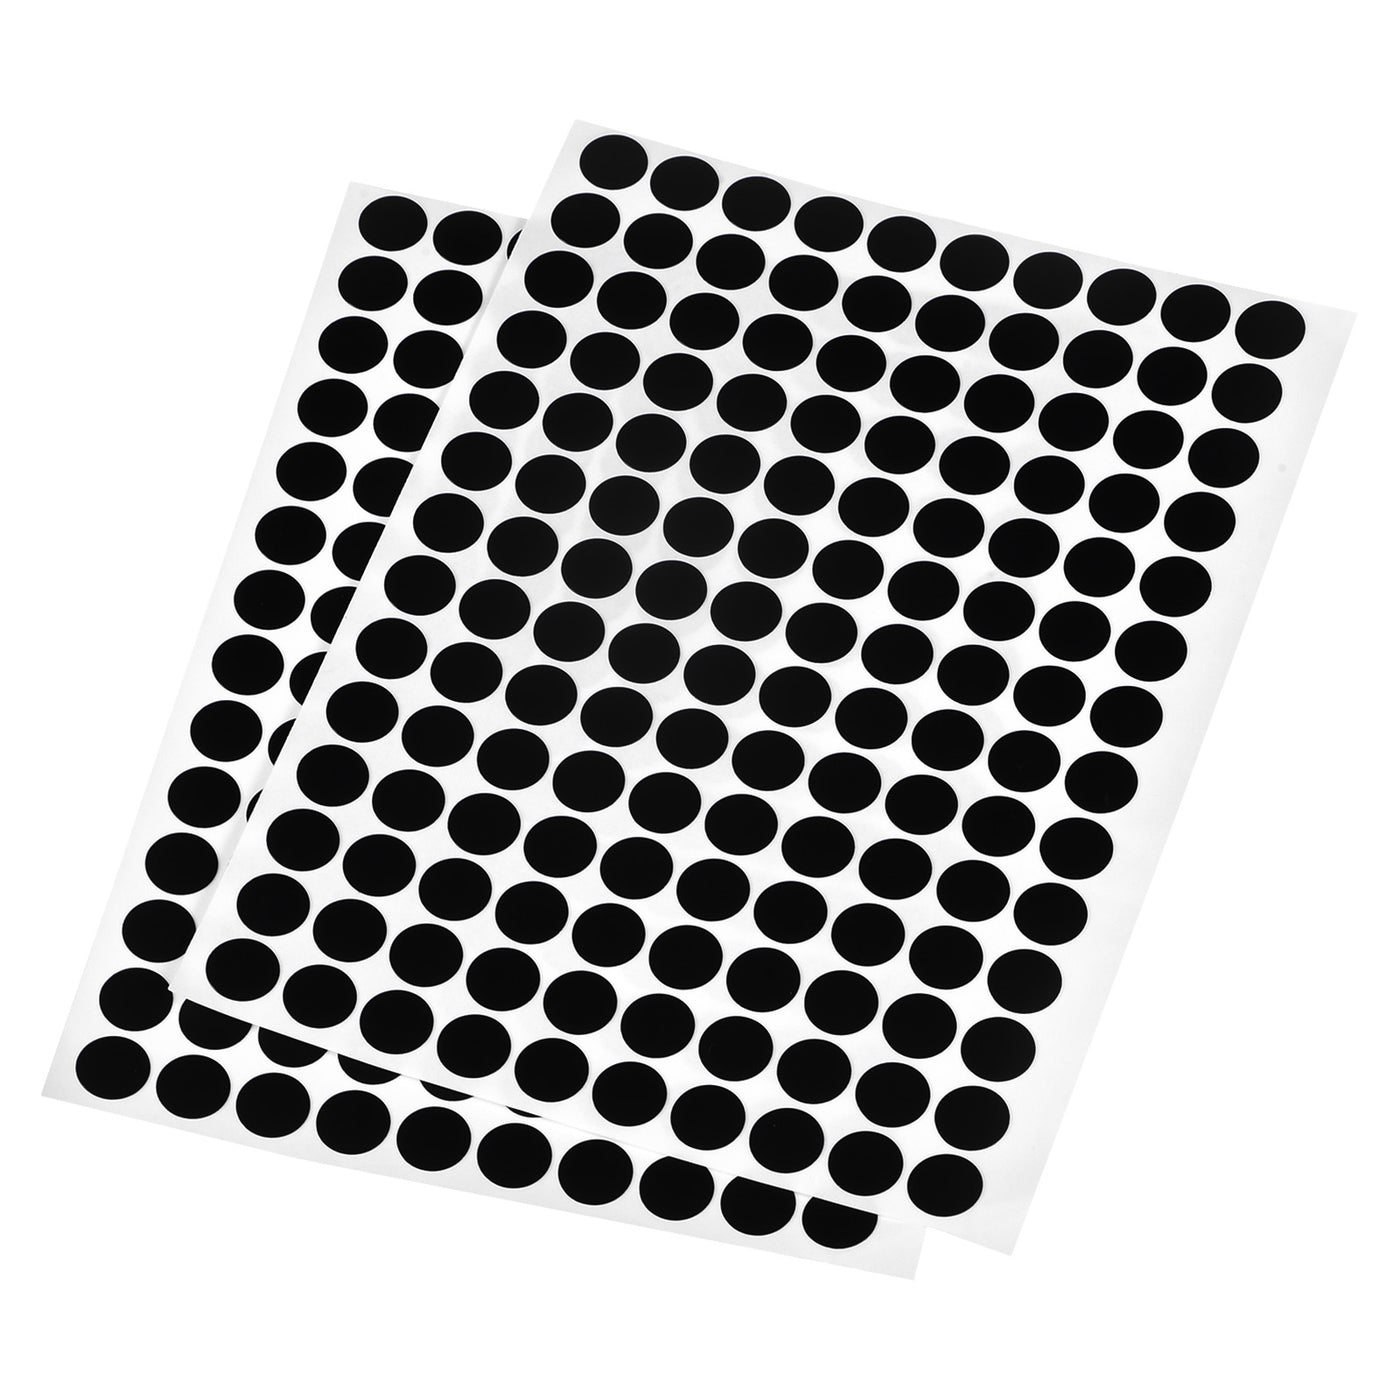 uxcell Uxcell Screw Hole Cover Stickers, 12mm Dia PVC Self Adhesive Covers Caps for Wood Furniture Cabinet Shelf Wardrobe, Black 6 Sheet/840pcs